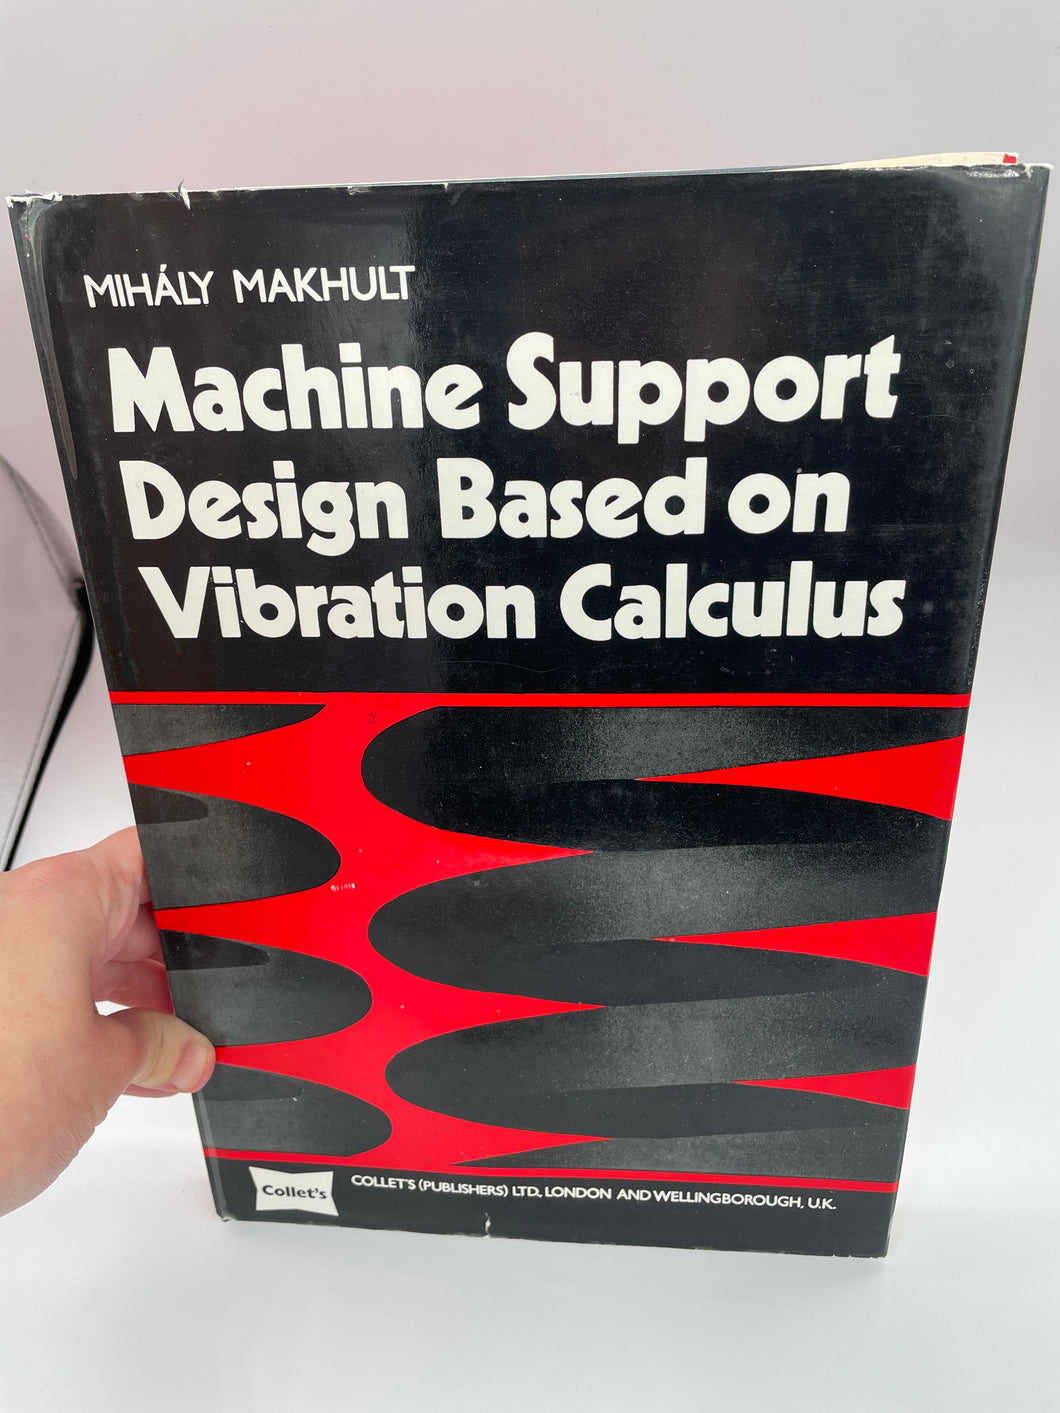 Machine Support Design Based on Vibration Calculus